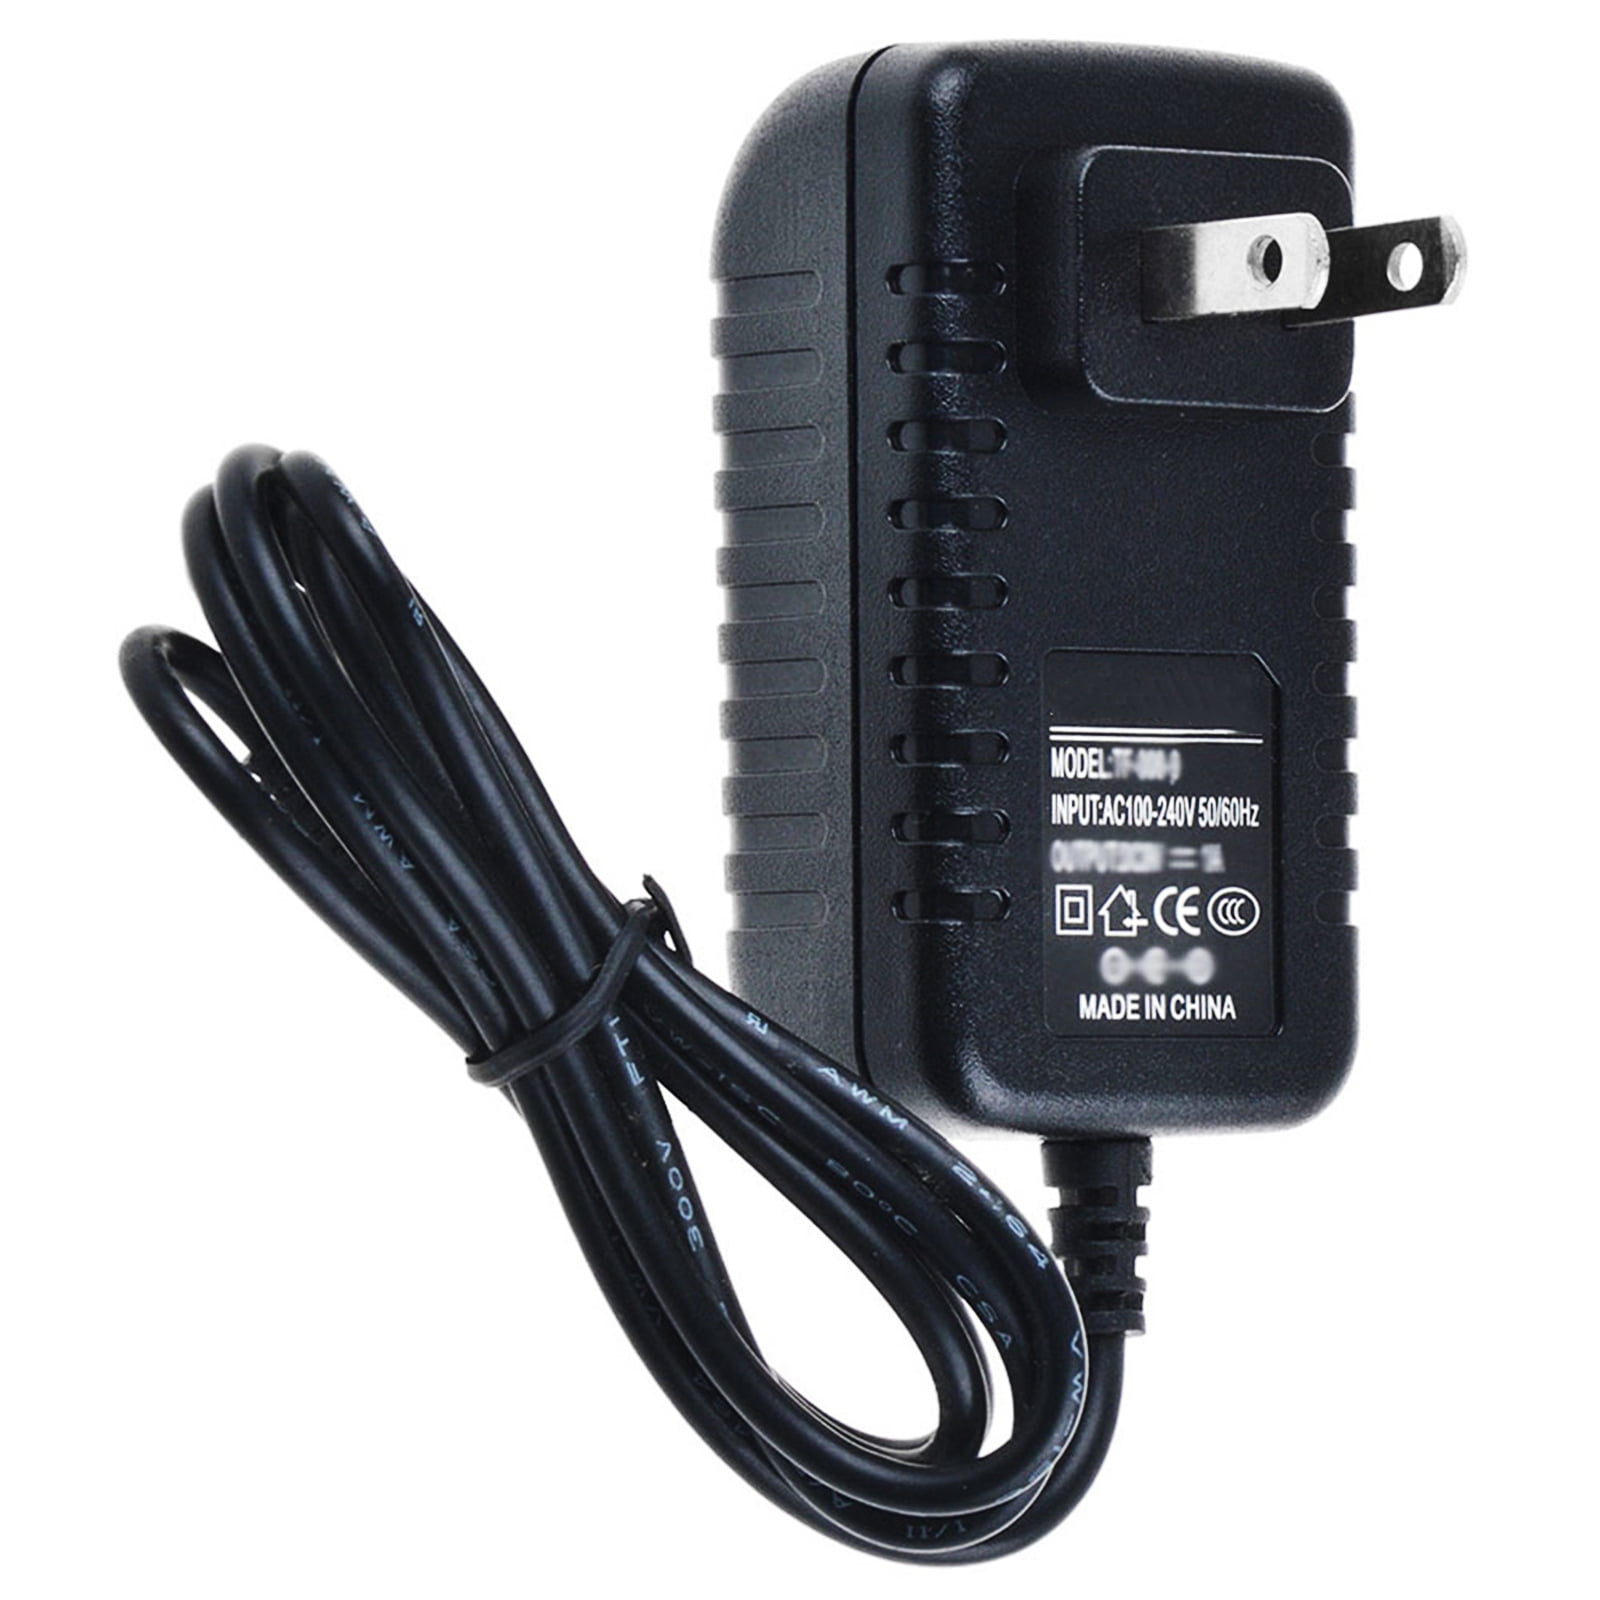 AC DC Adapter for Uniden AD70 AD-70U AD-7019 Bearcat Scanners Charger Power Cord 